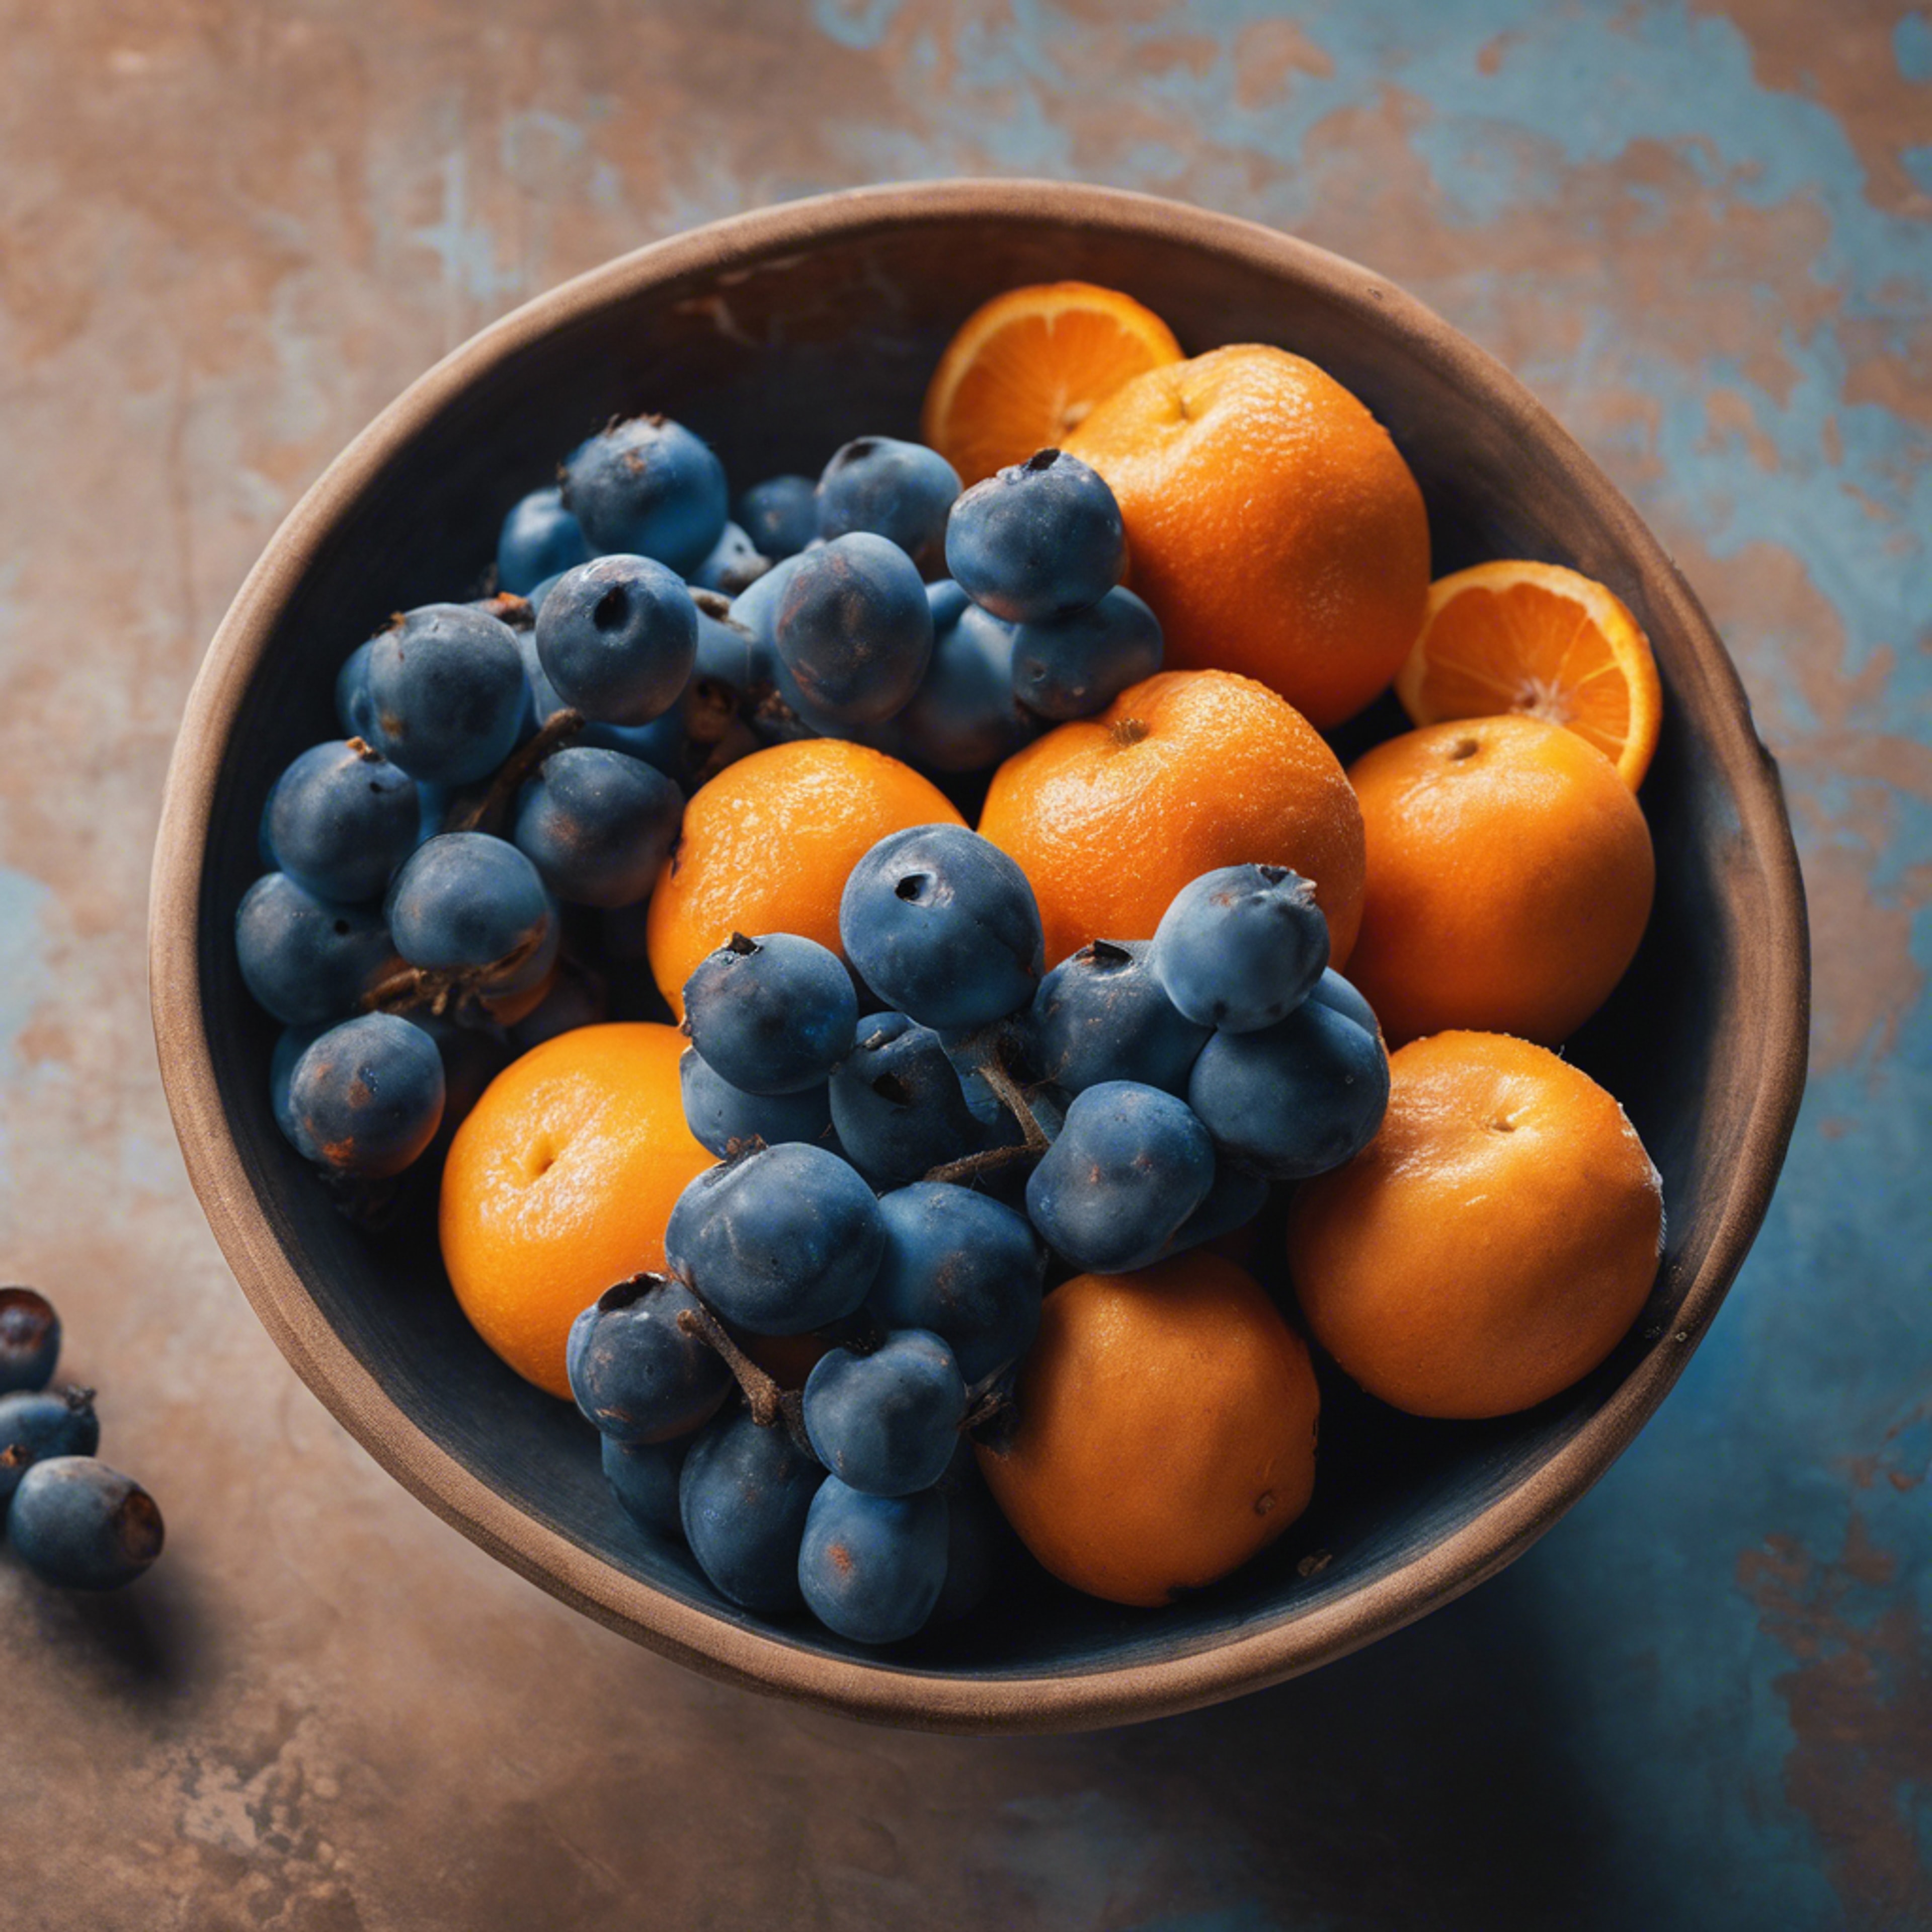 A still life of a bowl with blue and orange fruits.壁紙[76a2e9d62dc14bb89ba8]